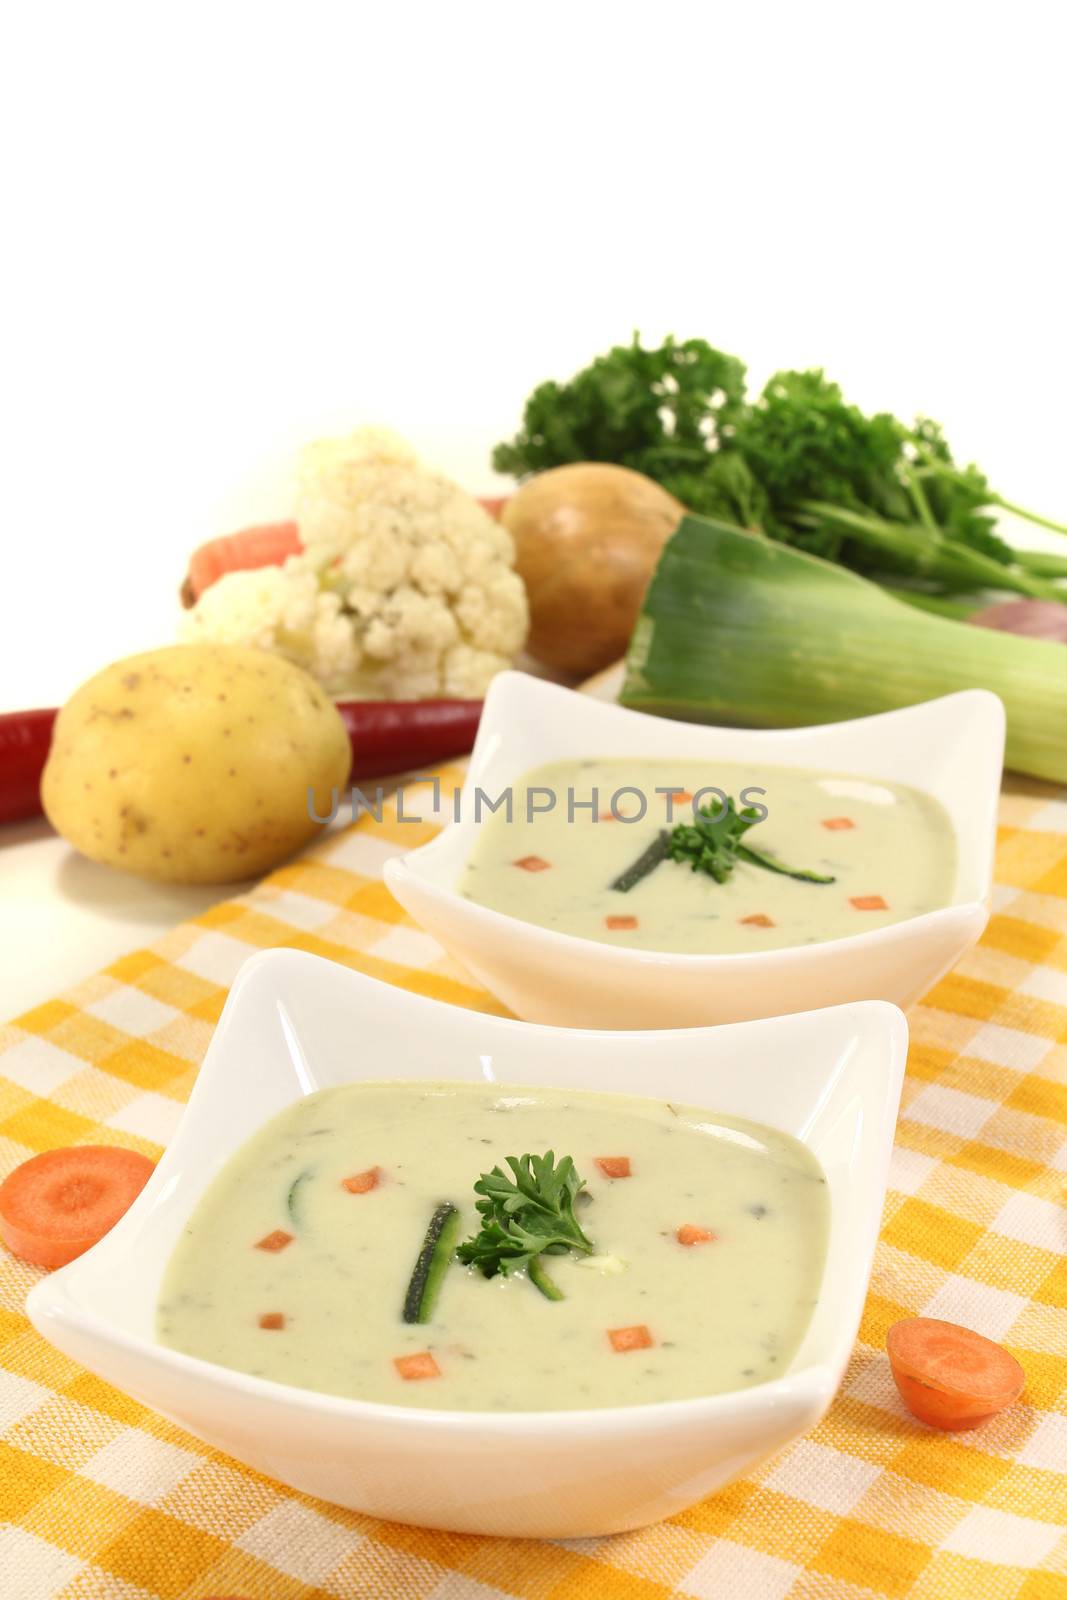 fresh vegetable soup with carrots and parsley on a light background